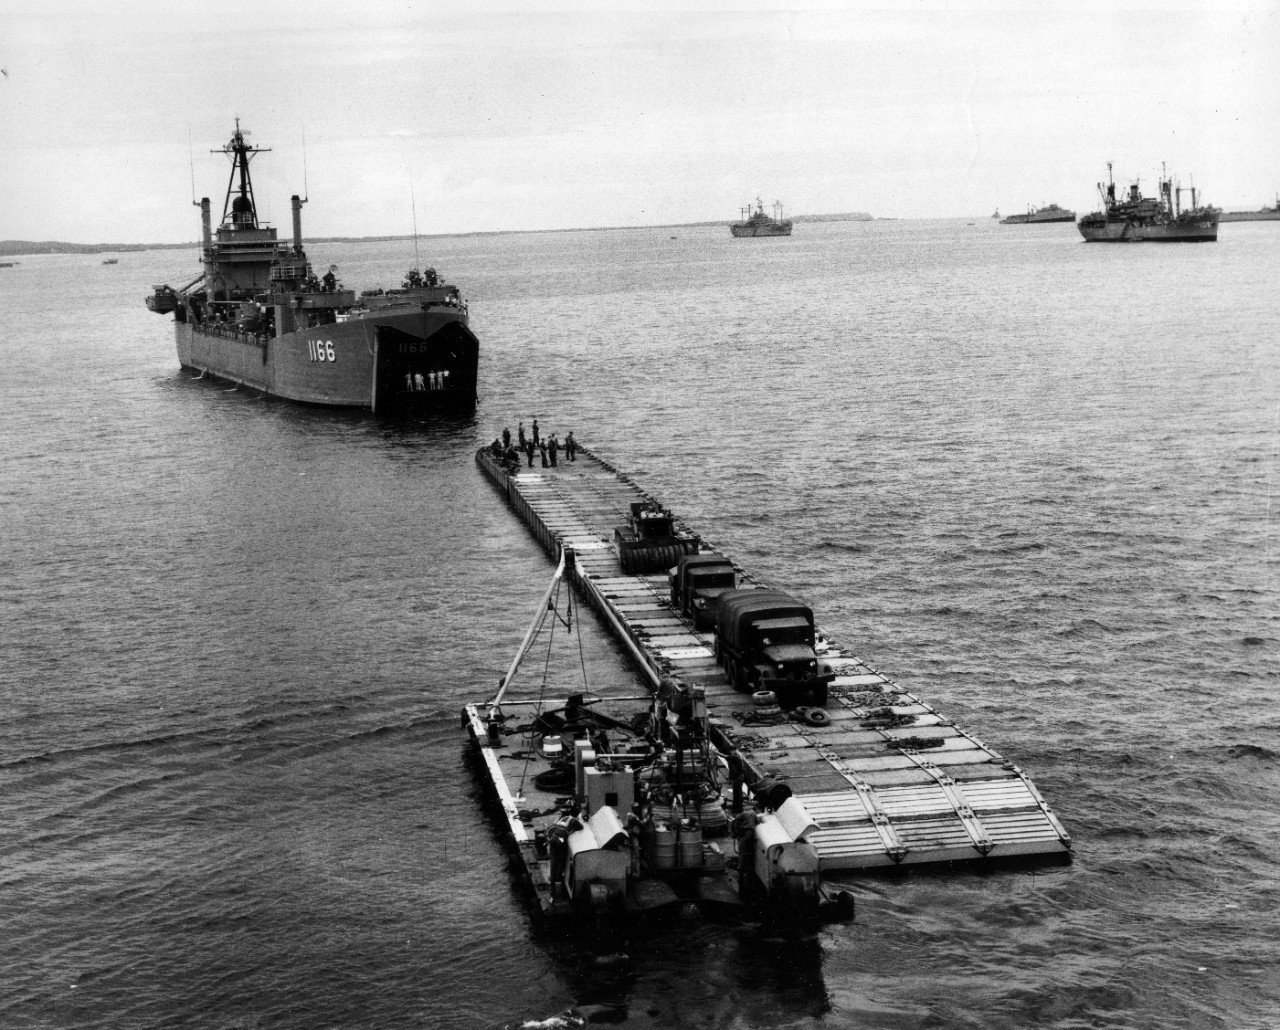 Collection of 24 images related to the May 1965 initial landings at Chu Lai, South Vietnam. Specific imagery consists of amphibious landing craft (large groupings at sea and unloading at the shore), helicopters carrying vehicles ashore, aerials of Chu Lai, unloading vehicles and cargo from USS Washtenaw County (LST-1166) and USS Vernon County (LST-1161), and USS Henrico (APA-45) off shore. 